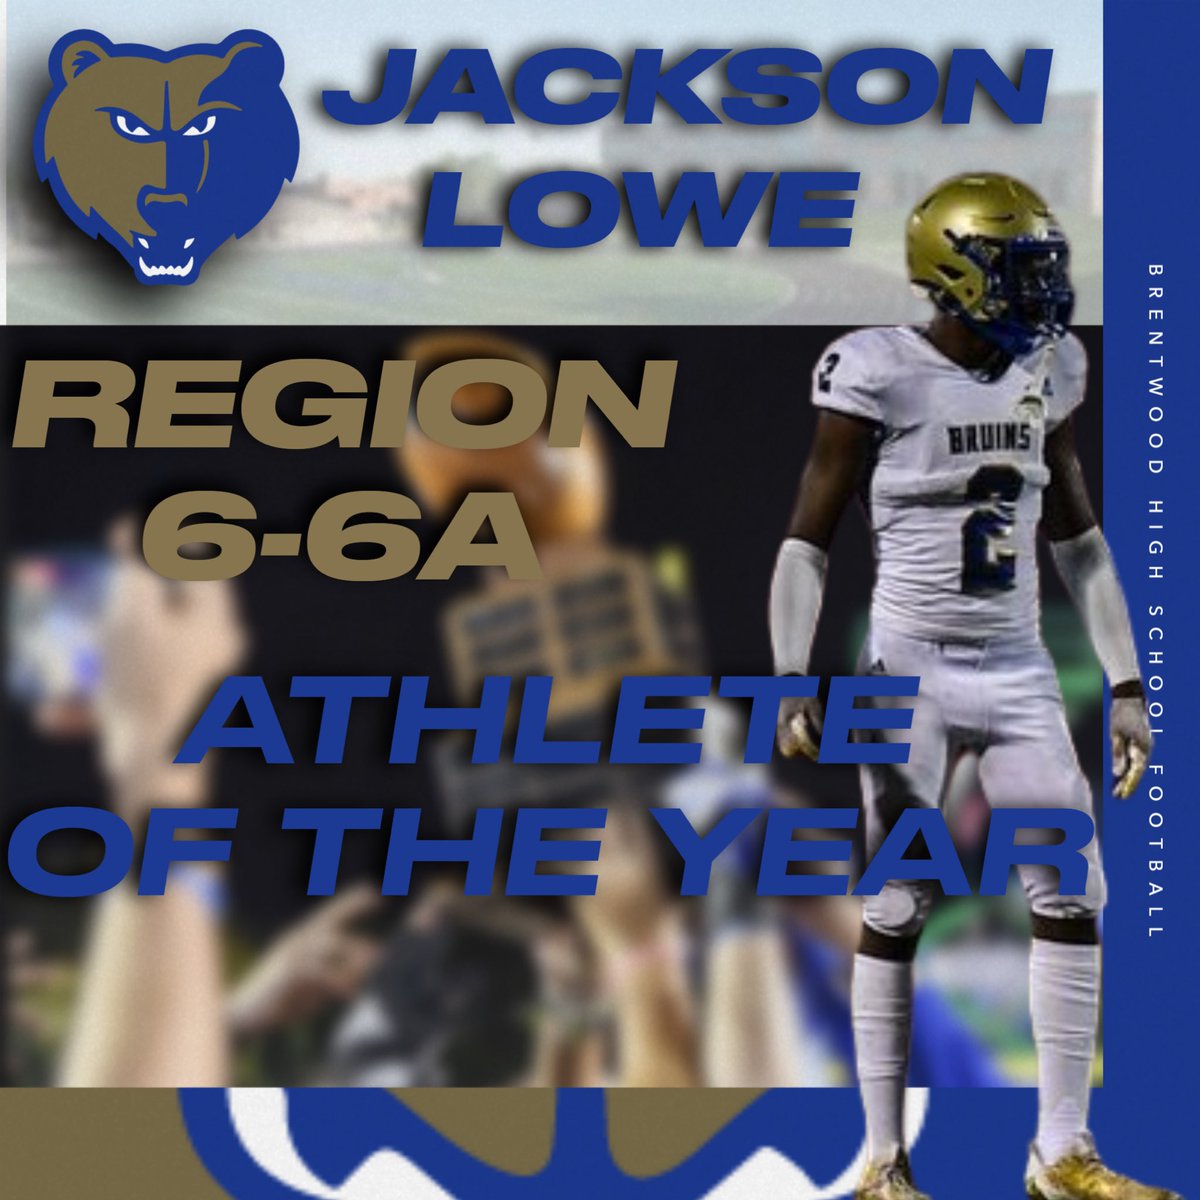 Congrats to @JacksonLowe677 for being selected the Region 6-6A Athlete of the Year. @wcsBHScf